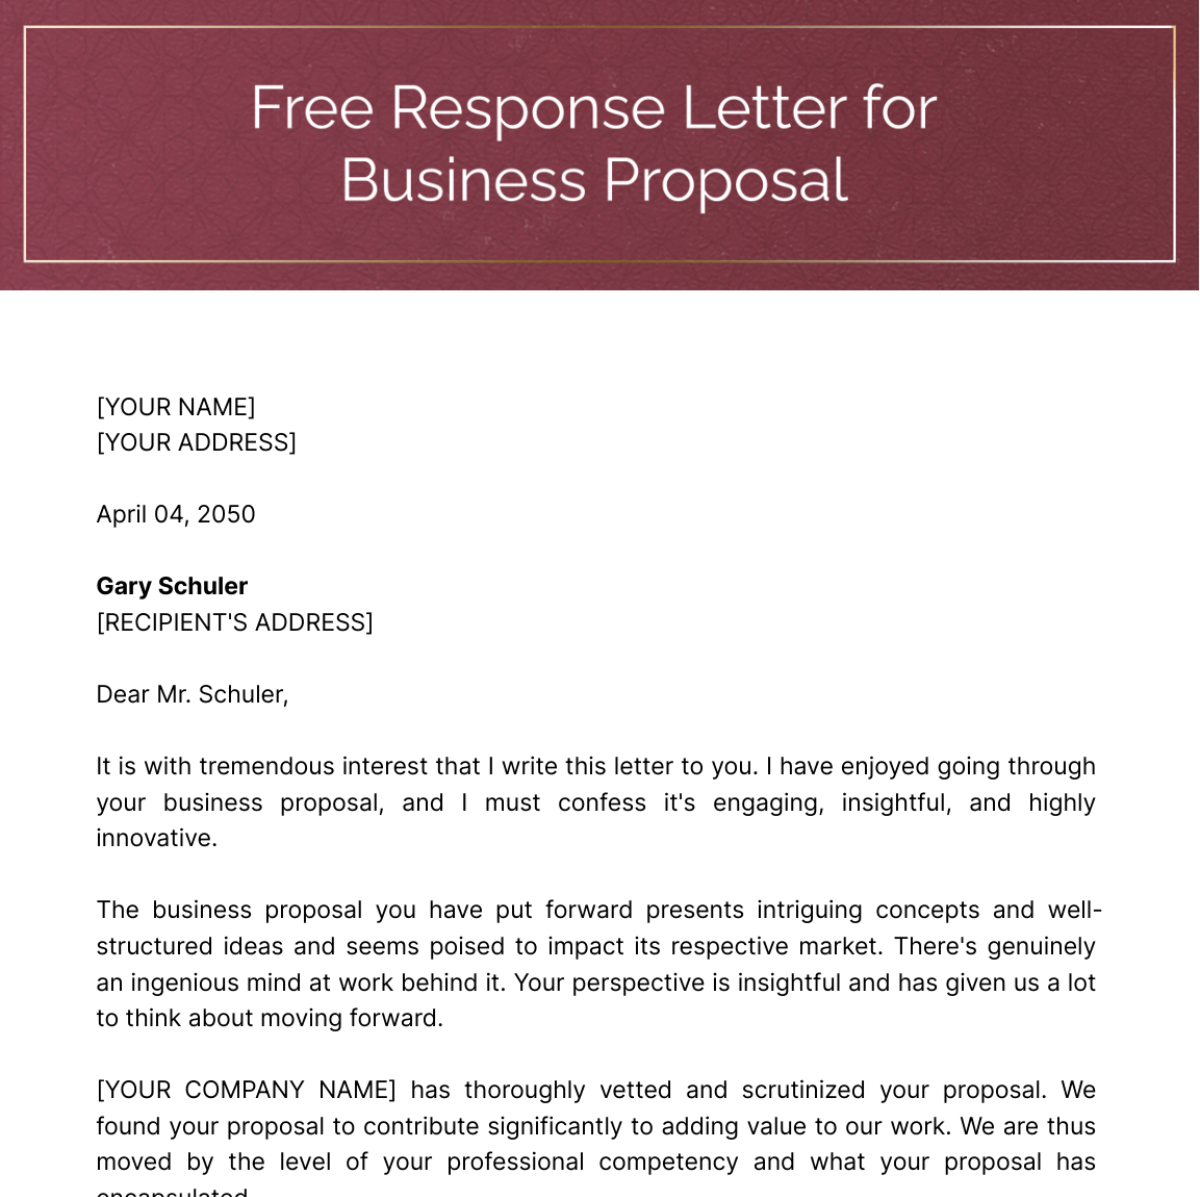 Free Response Letter for Business Proposal